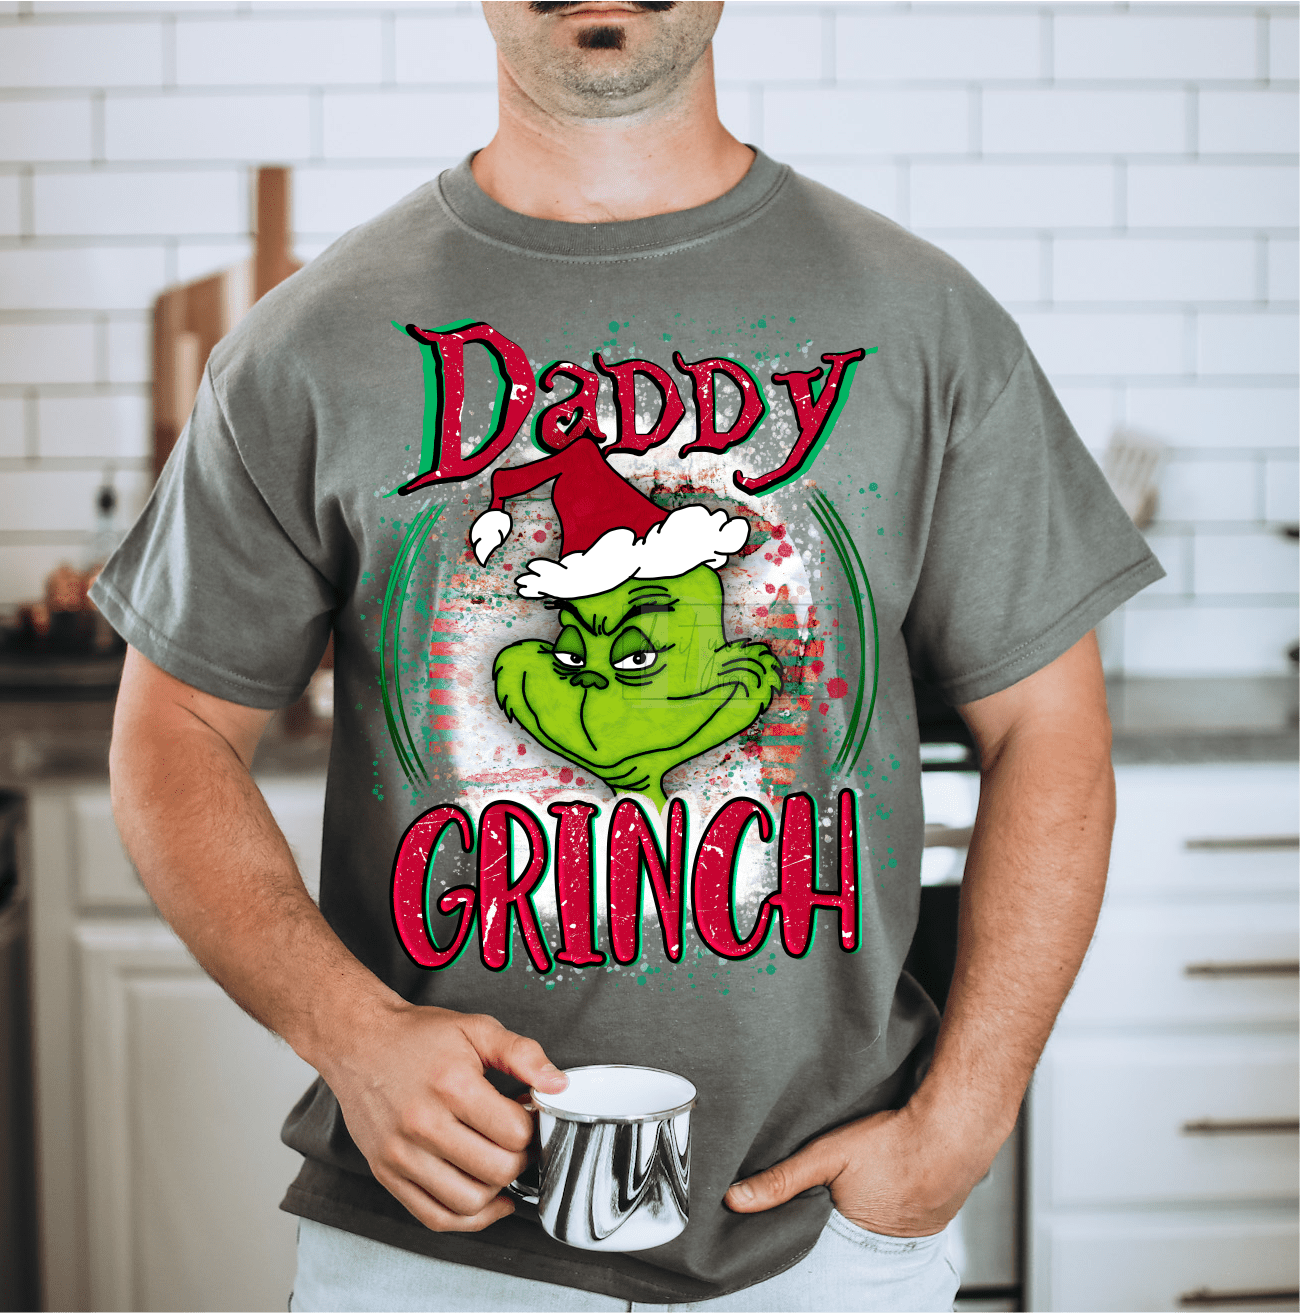 Daddy GREEN MAN Christmas size DTF TRANSFERPRINT TO ORDER - Do it yourself Transfers